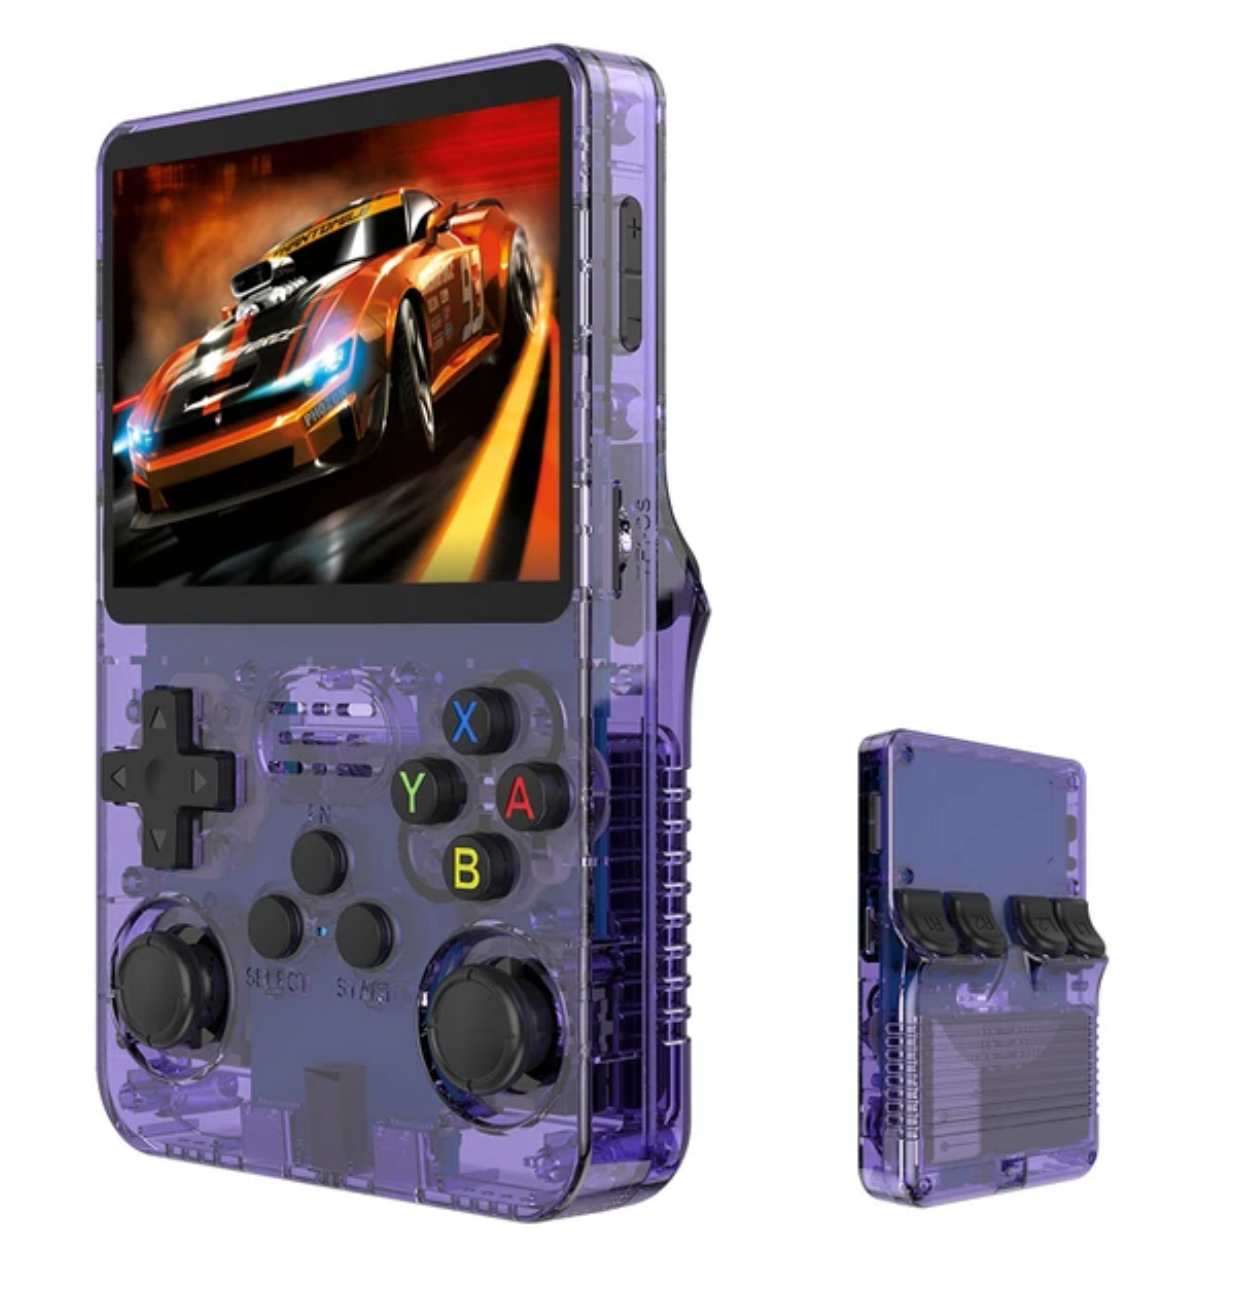 R36S Video Game Console